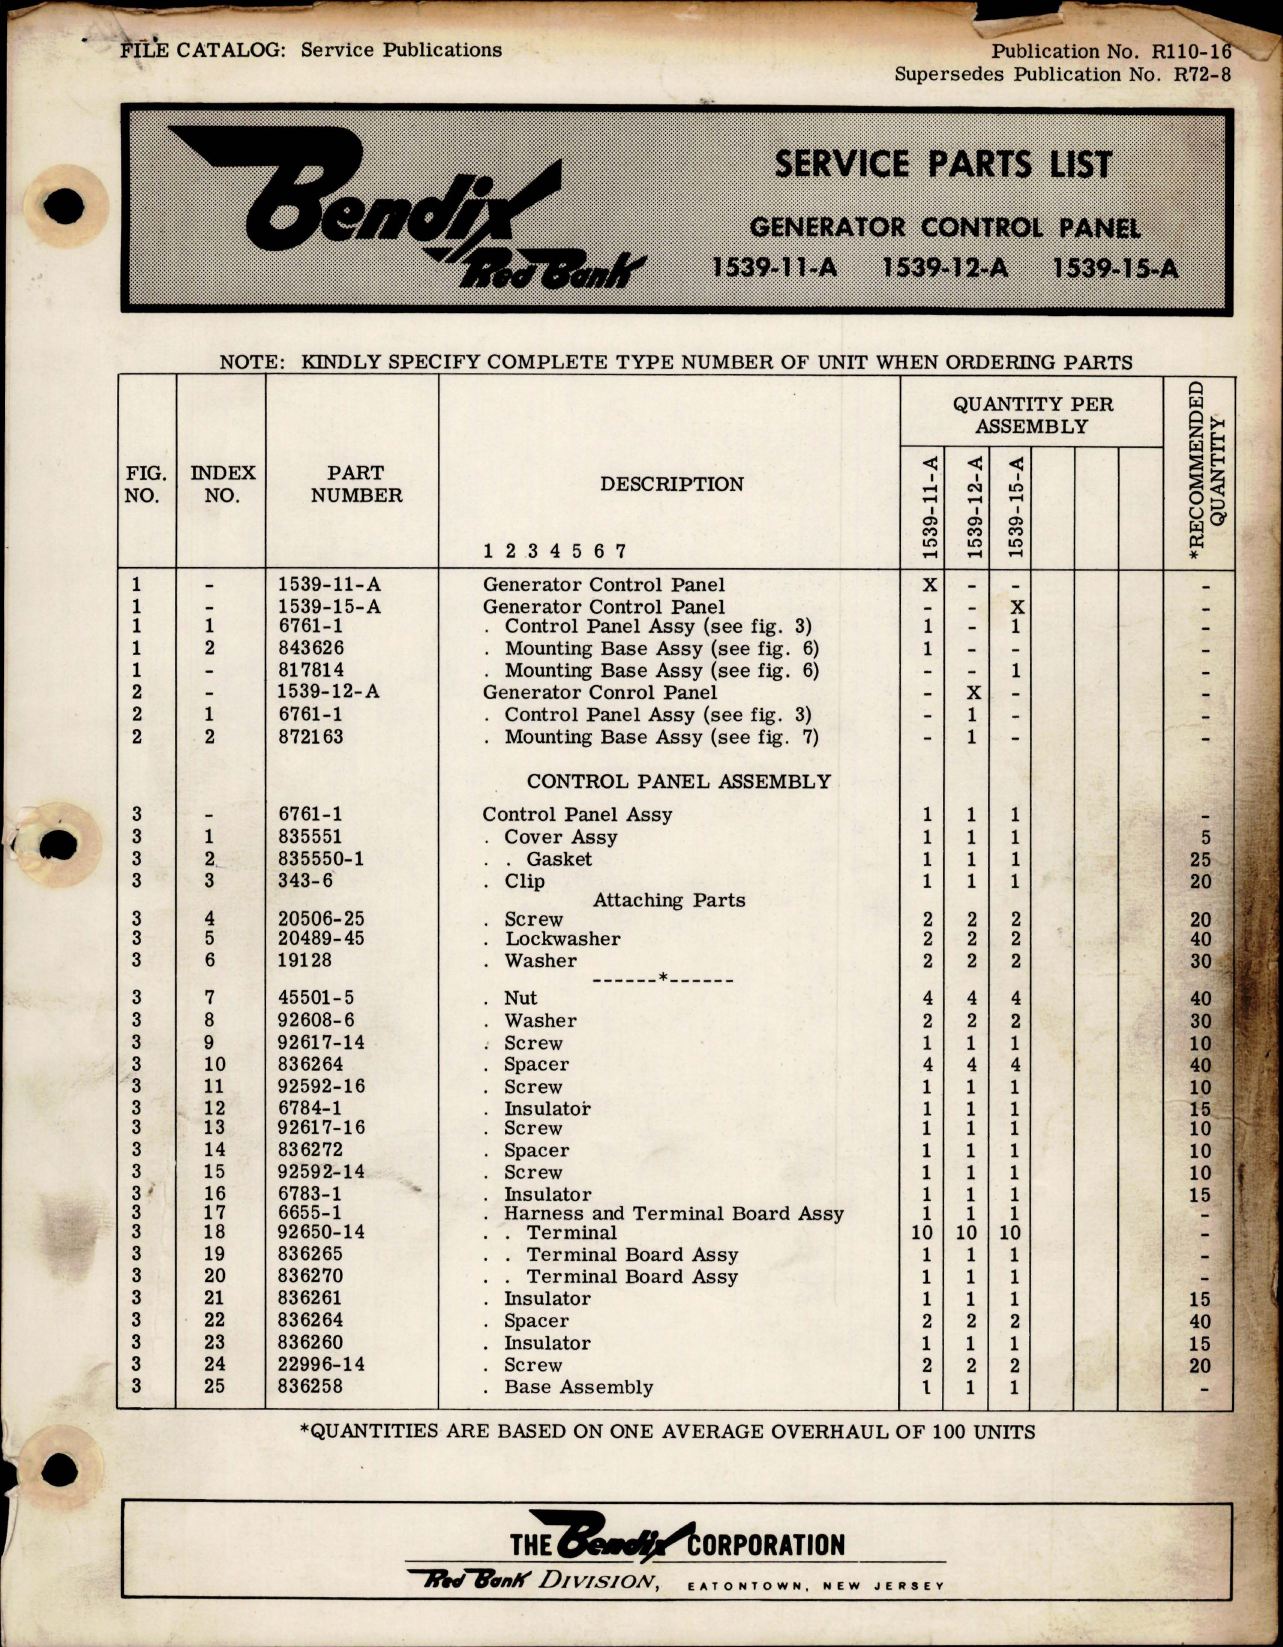 Sample page 1 from AirCorps Library document: Service Parts List for Generator Control Panel - 1539-11-A, 1539-12-A and 1539-15-A 